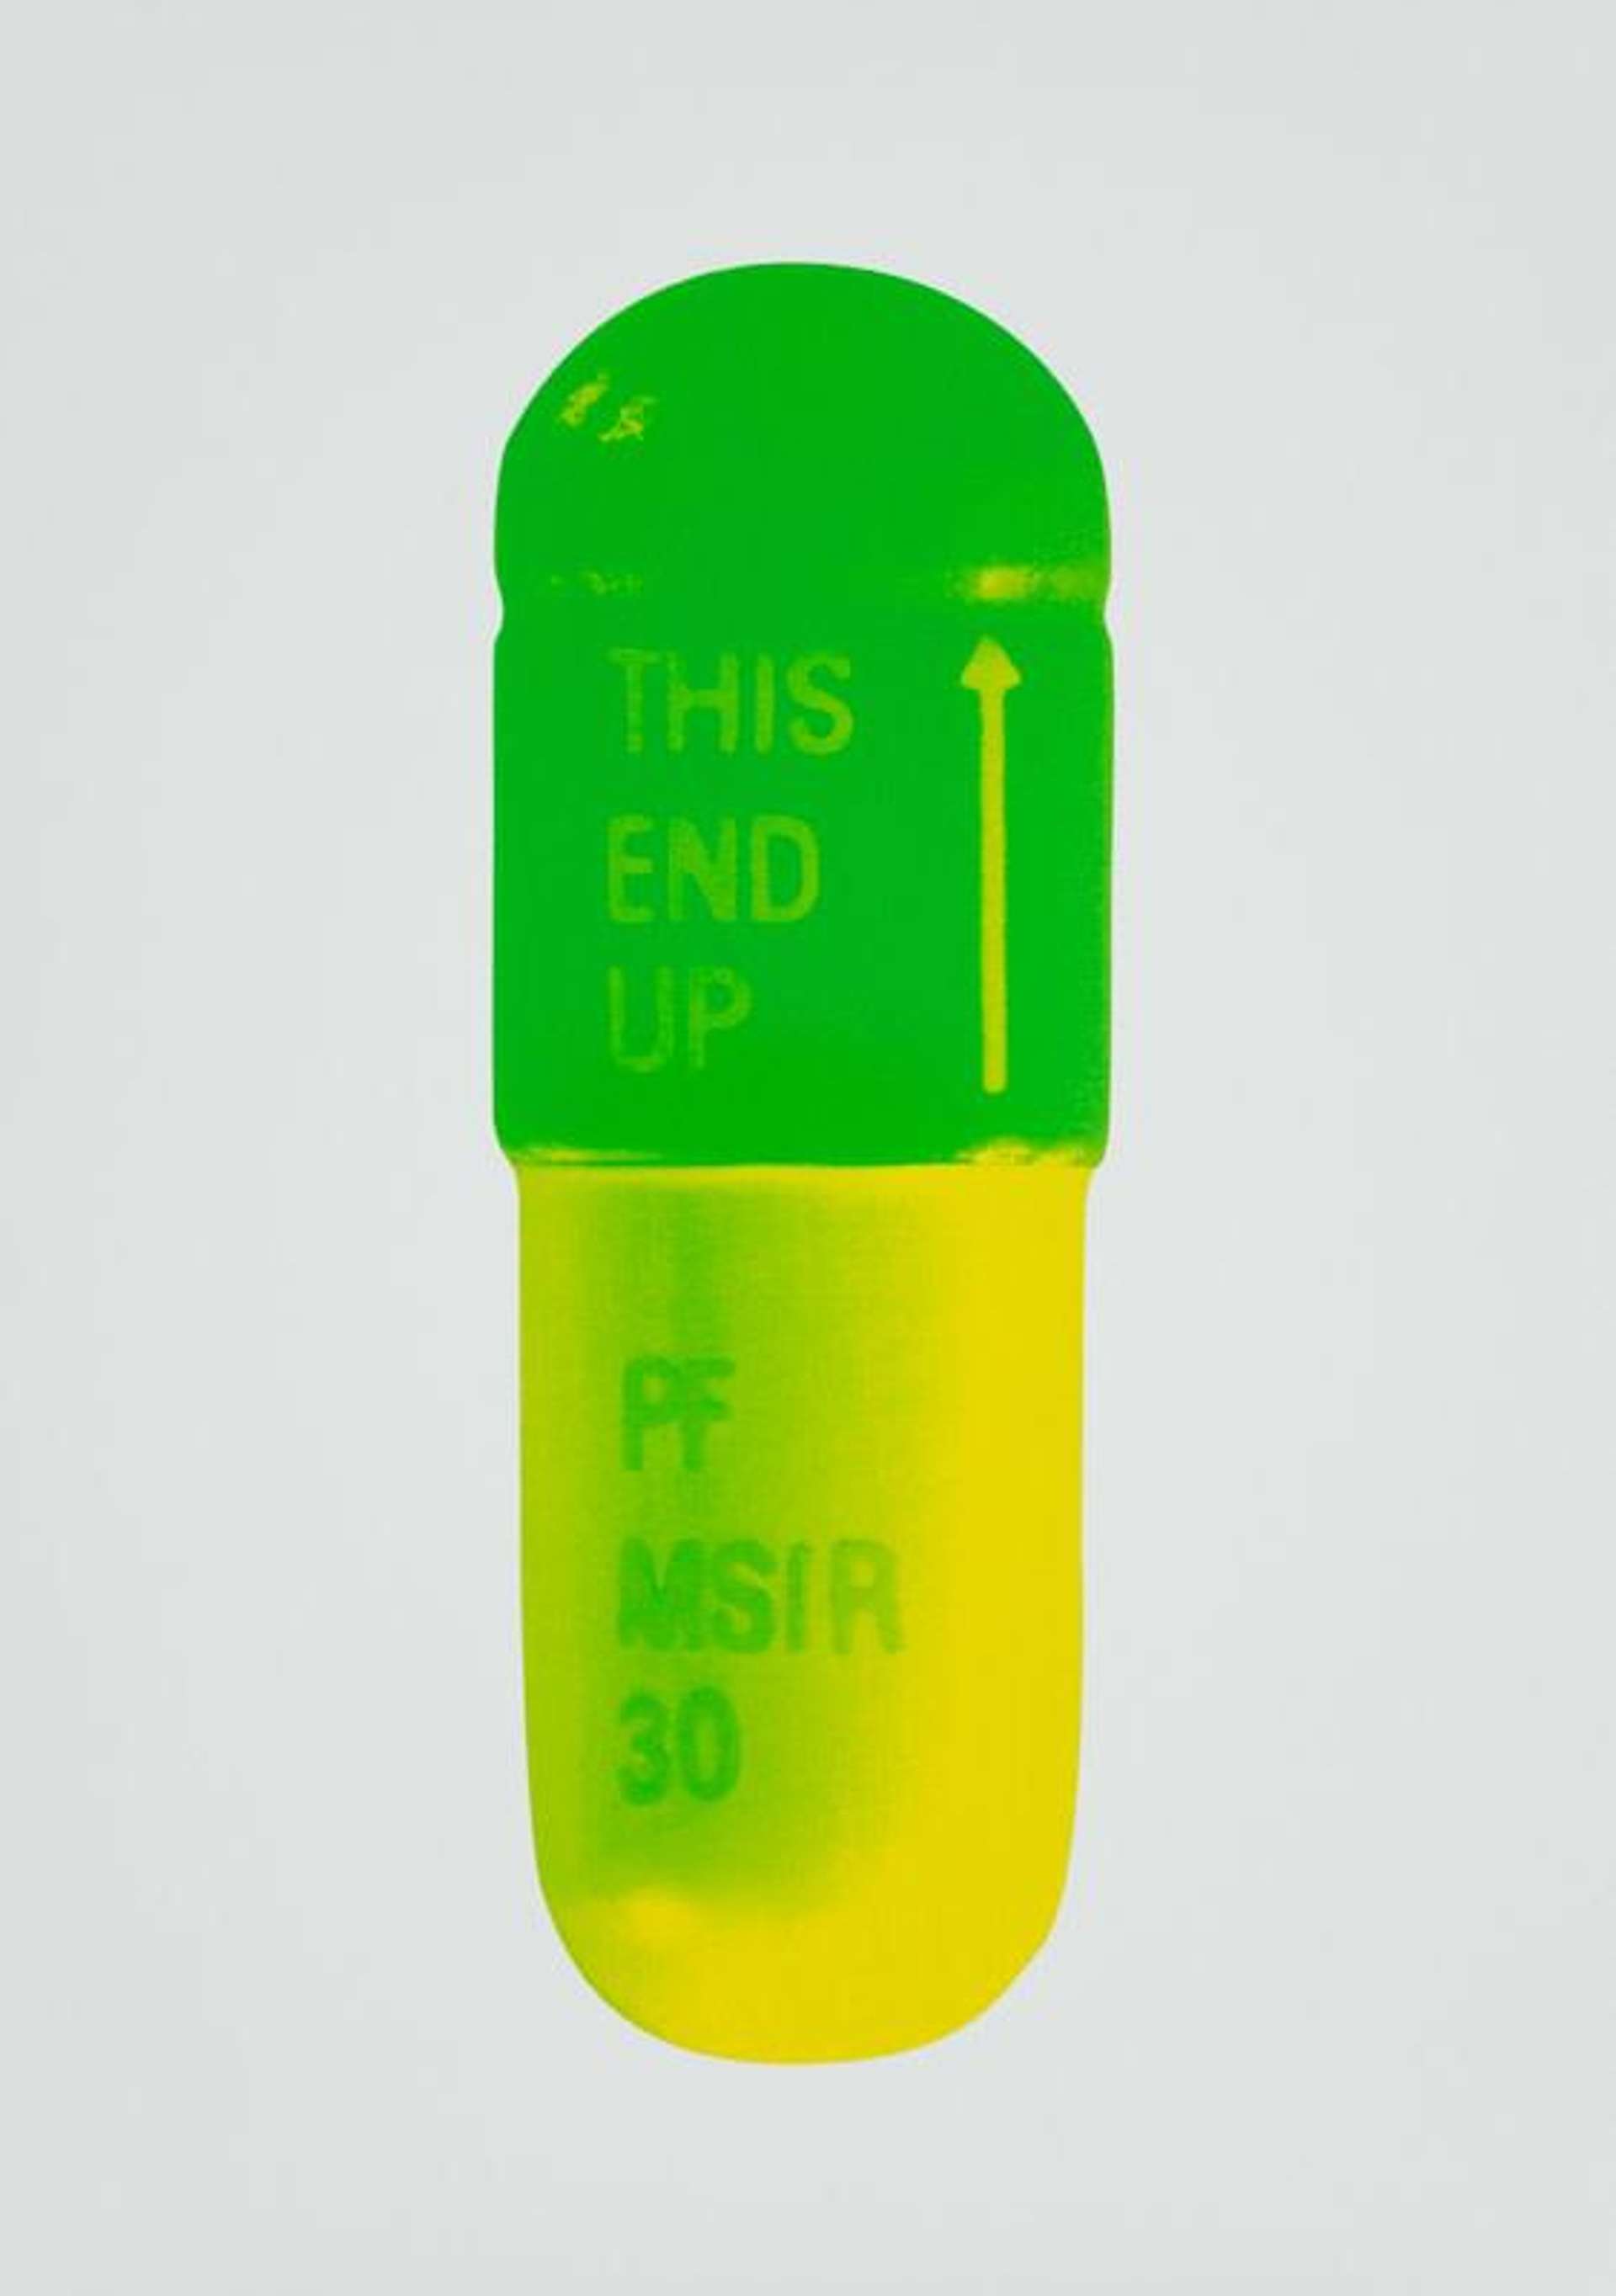 Damien Hirst: The Cure (mint blue, apple green, lemon yellow) - Signed Print